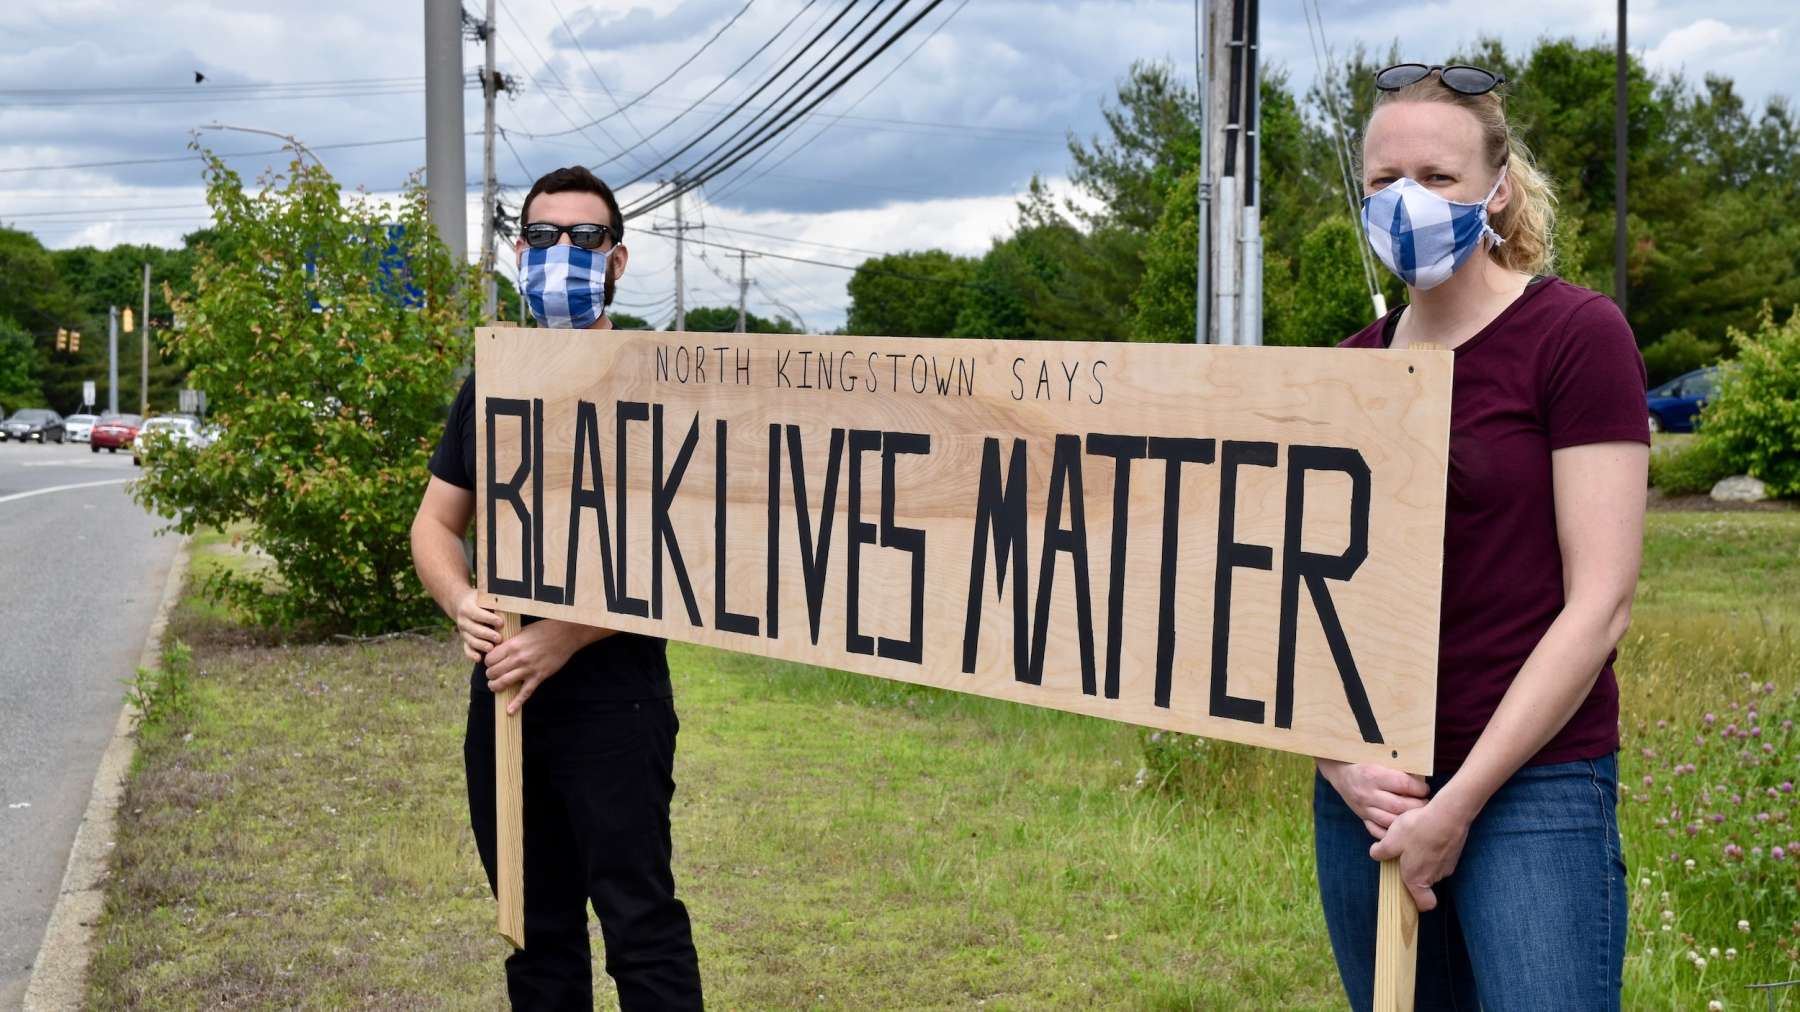 Rhode Island News: North Kingstown residents proudly proclaim that Black Lives Matter